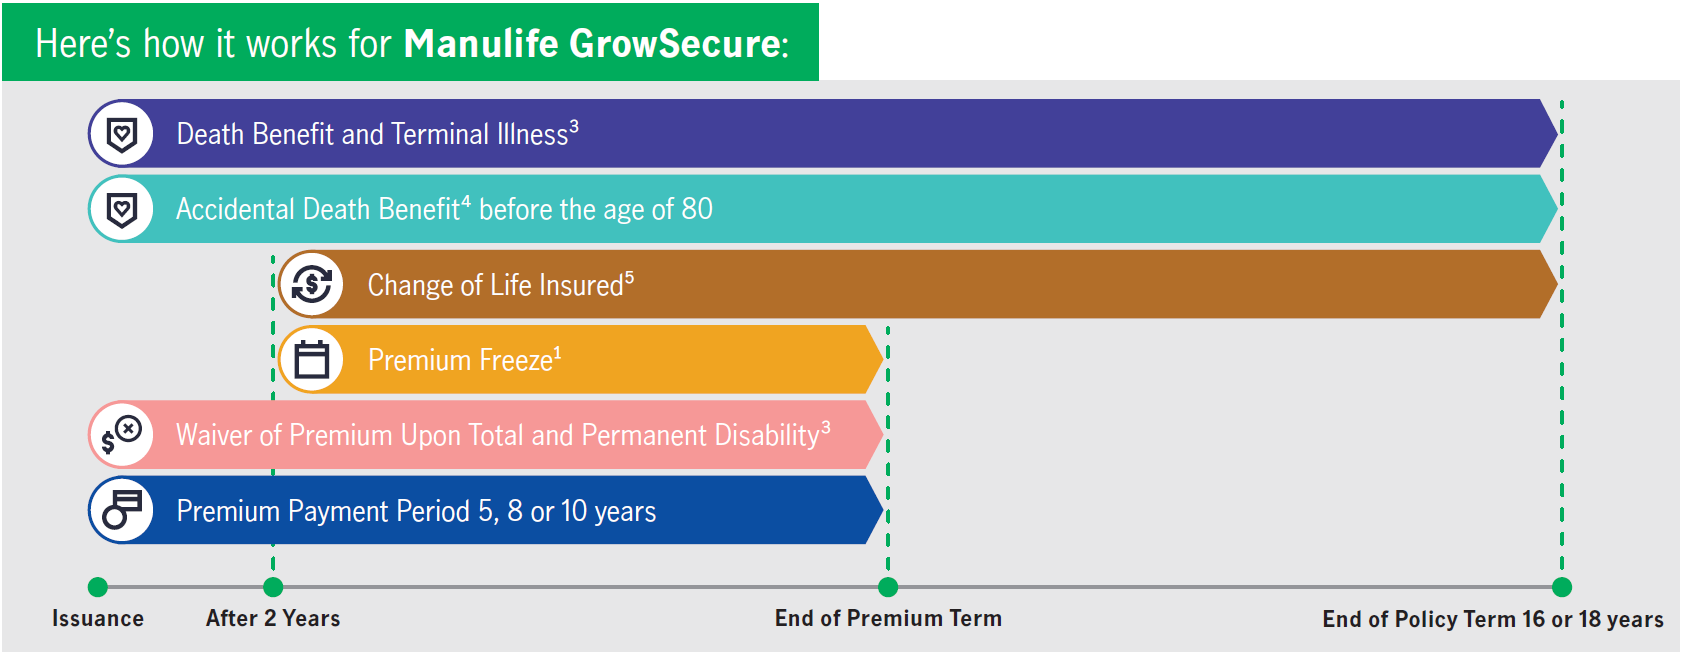 Here’s how it works for Manulife GrowSecure